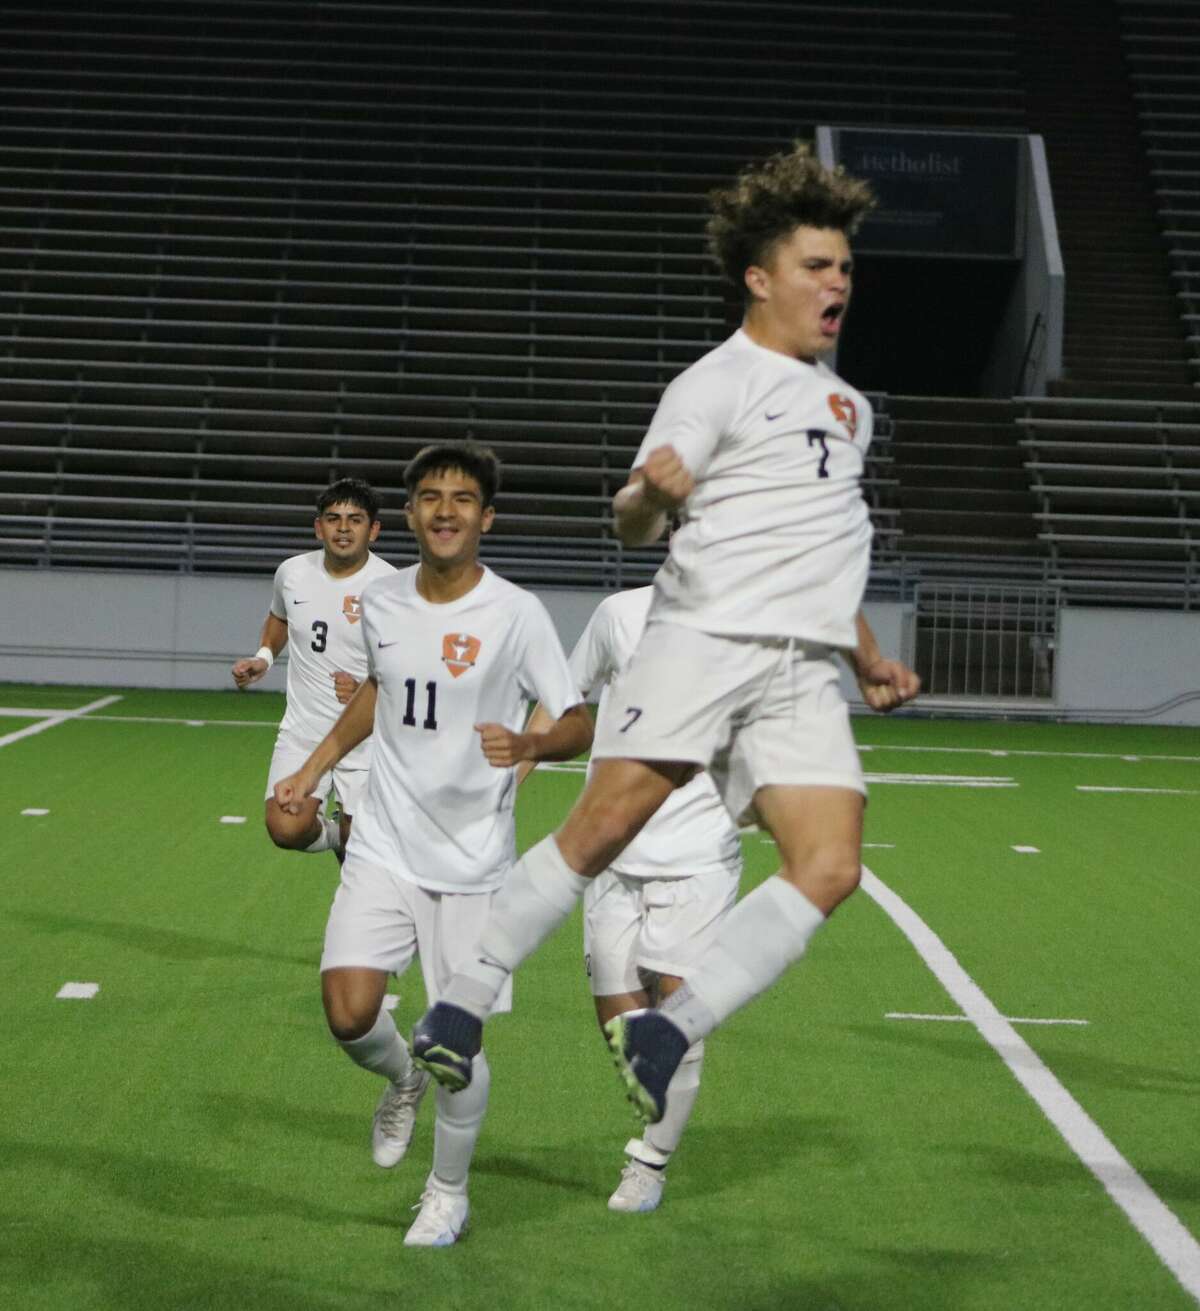 Dobie's Victor Hernandez (7) shows a tiny bit of excitement after scoring a goal in the opening minutes of Tuesday night's match in the "Enrique Brothers Bowl" 